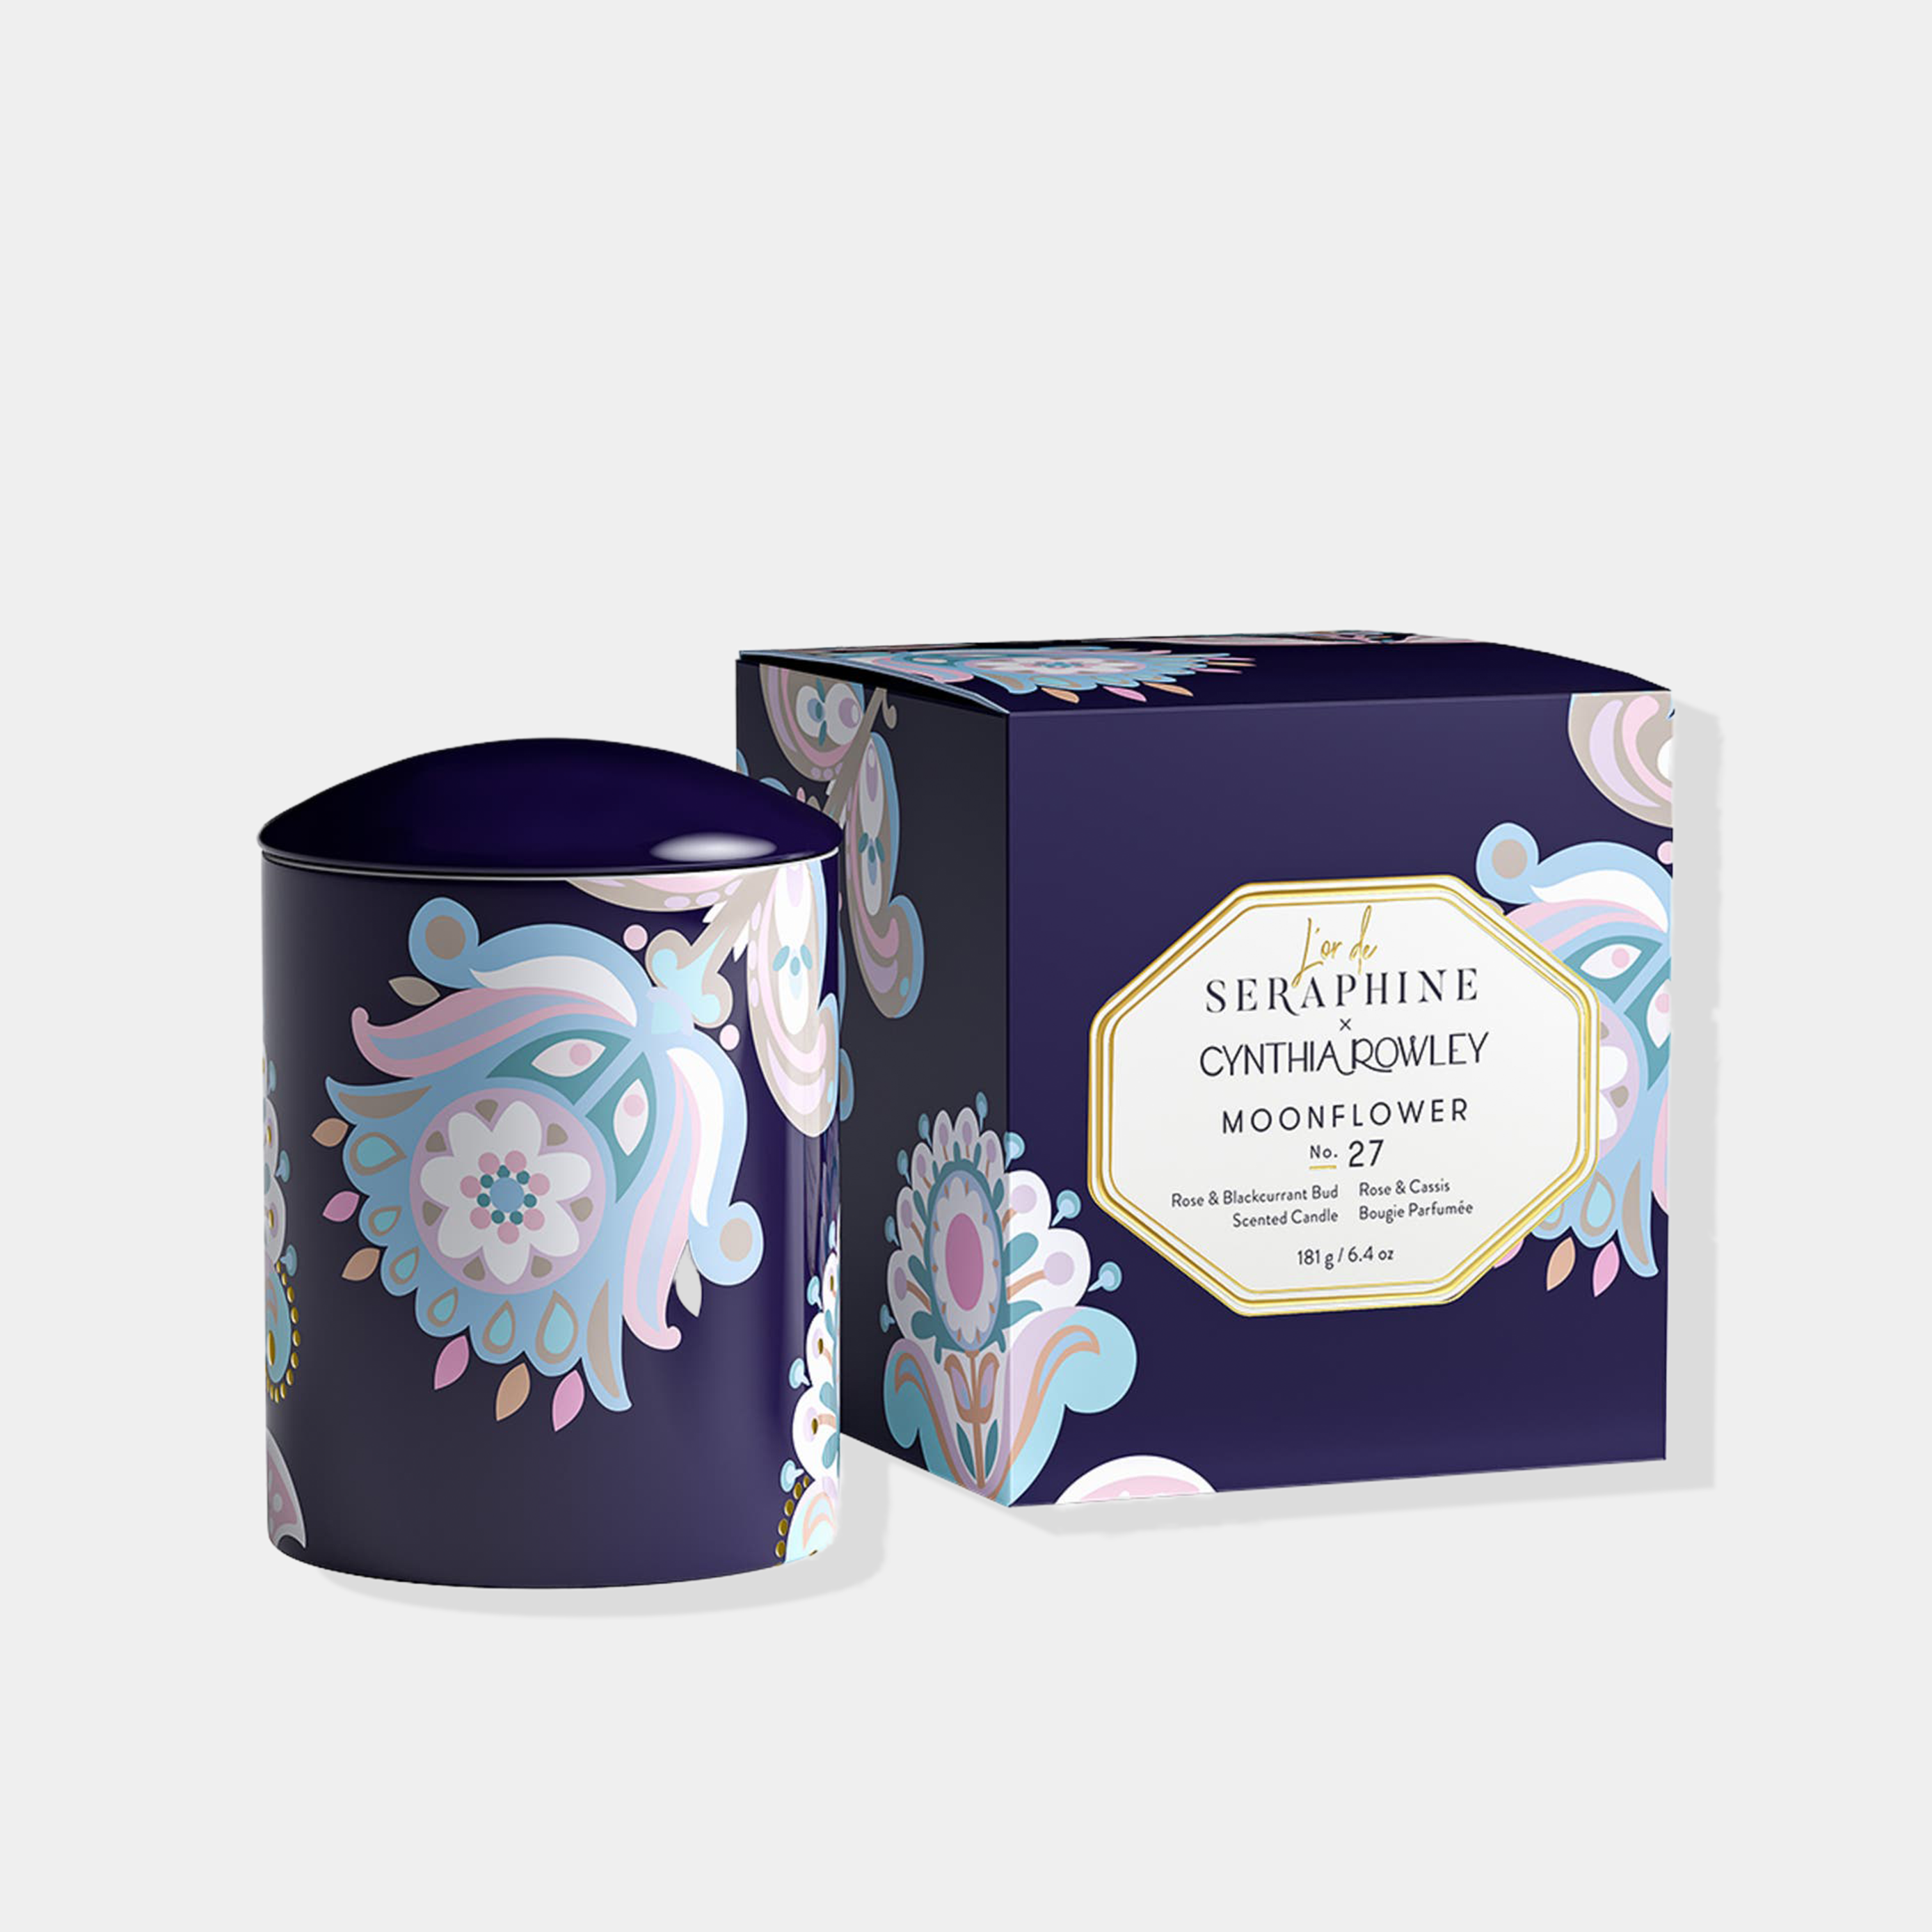 L'Or de Seraphine x Cynthia Rowley Moonflower Candle